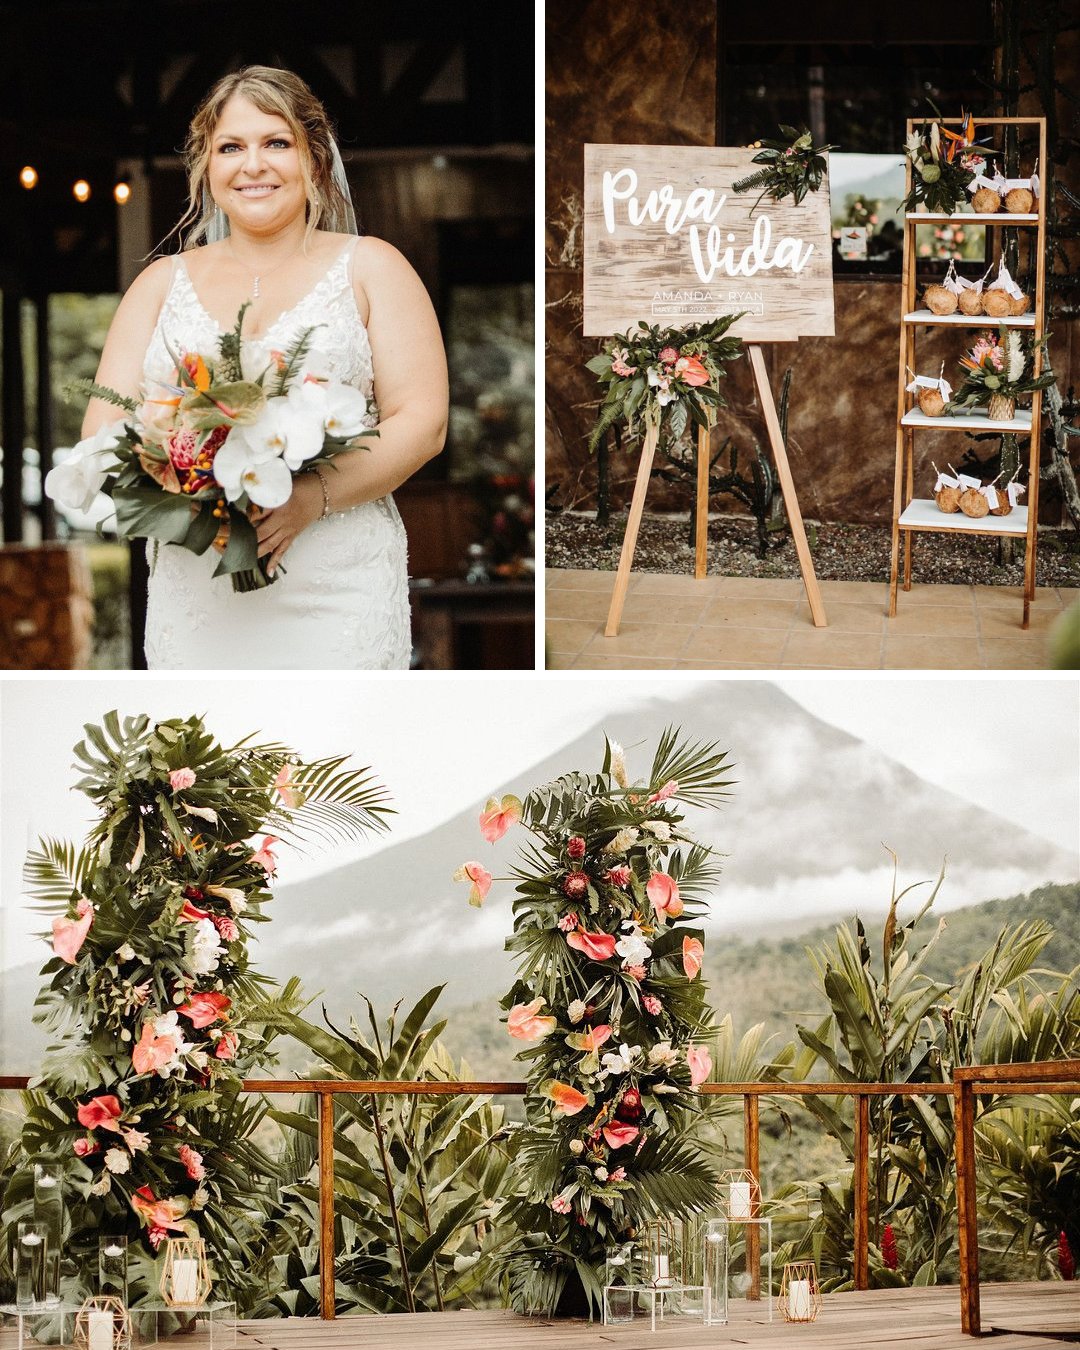 pura vida welcome sign, bride with bouquet, tropical arch with volcano in background